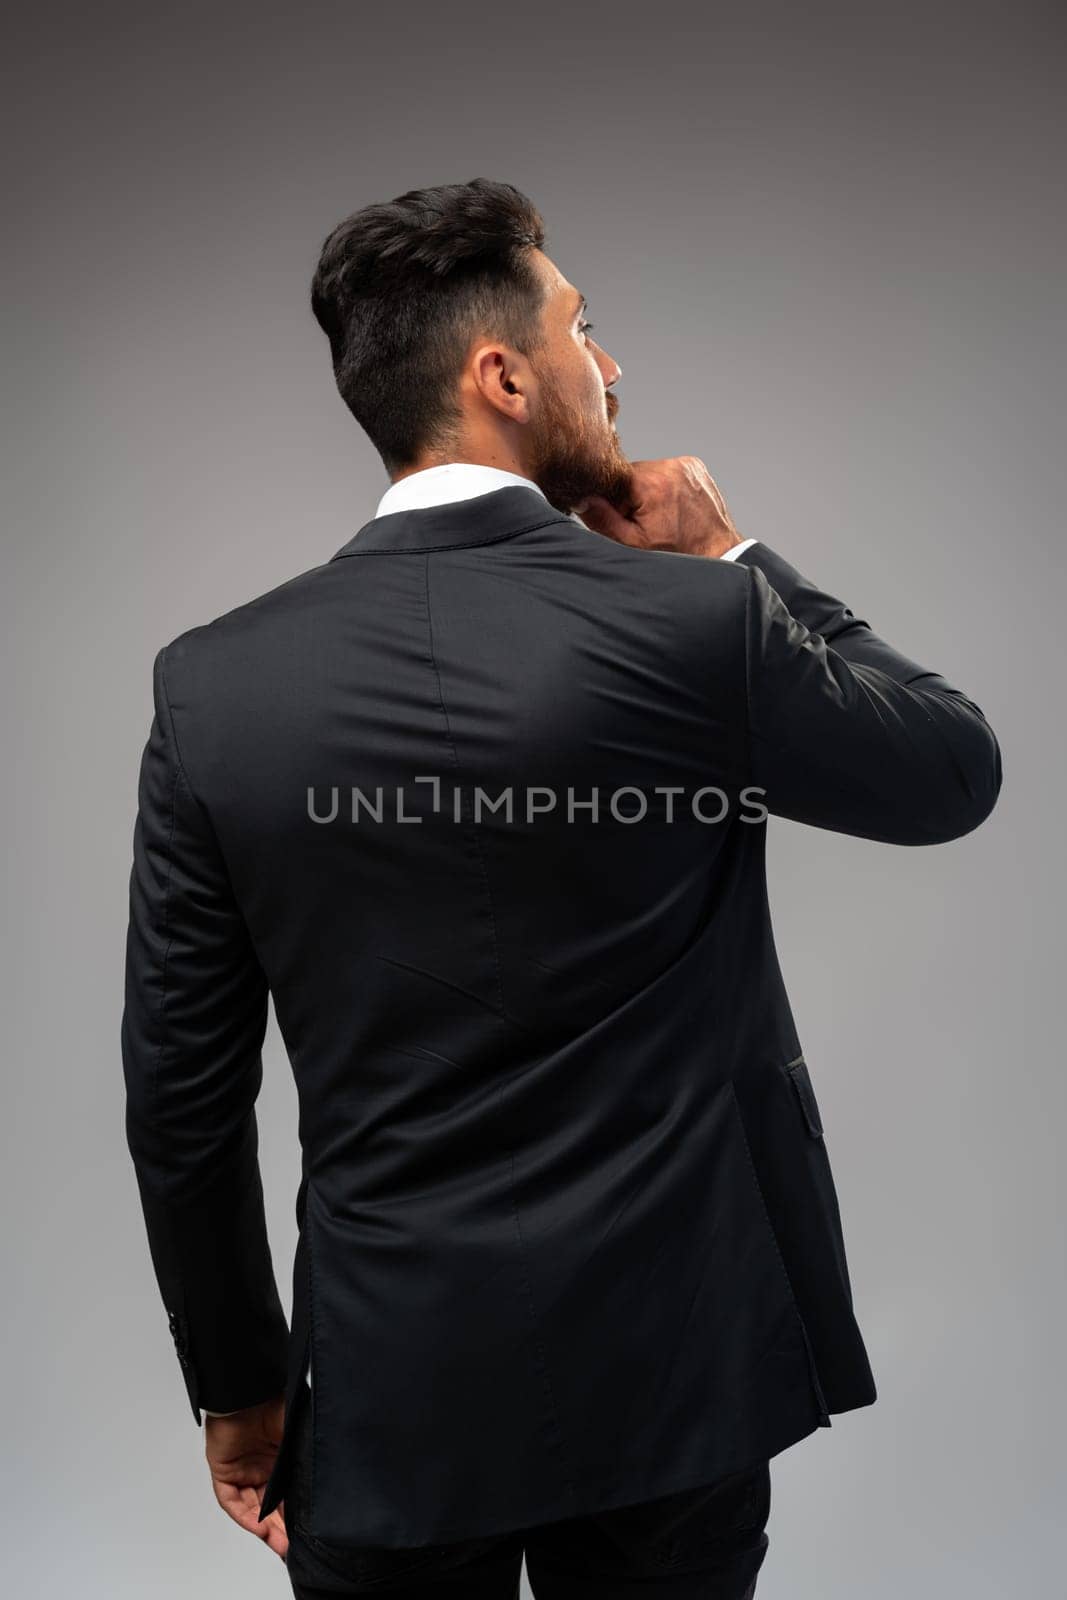 Studuo shot of thinking businessman standing over gray background close up